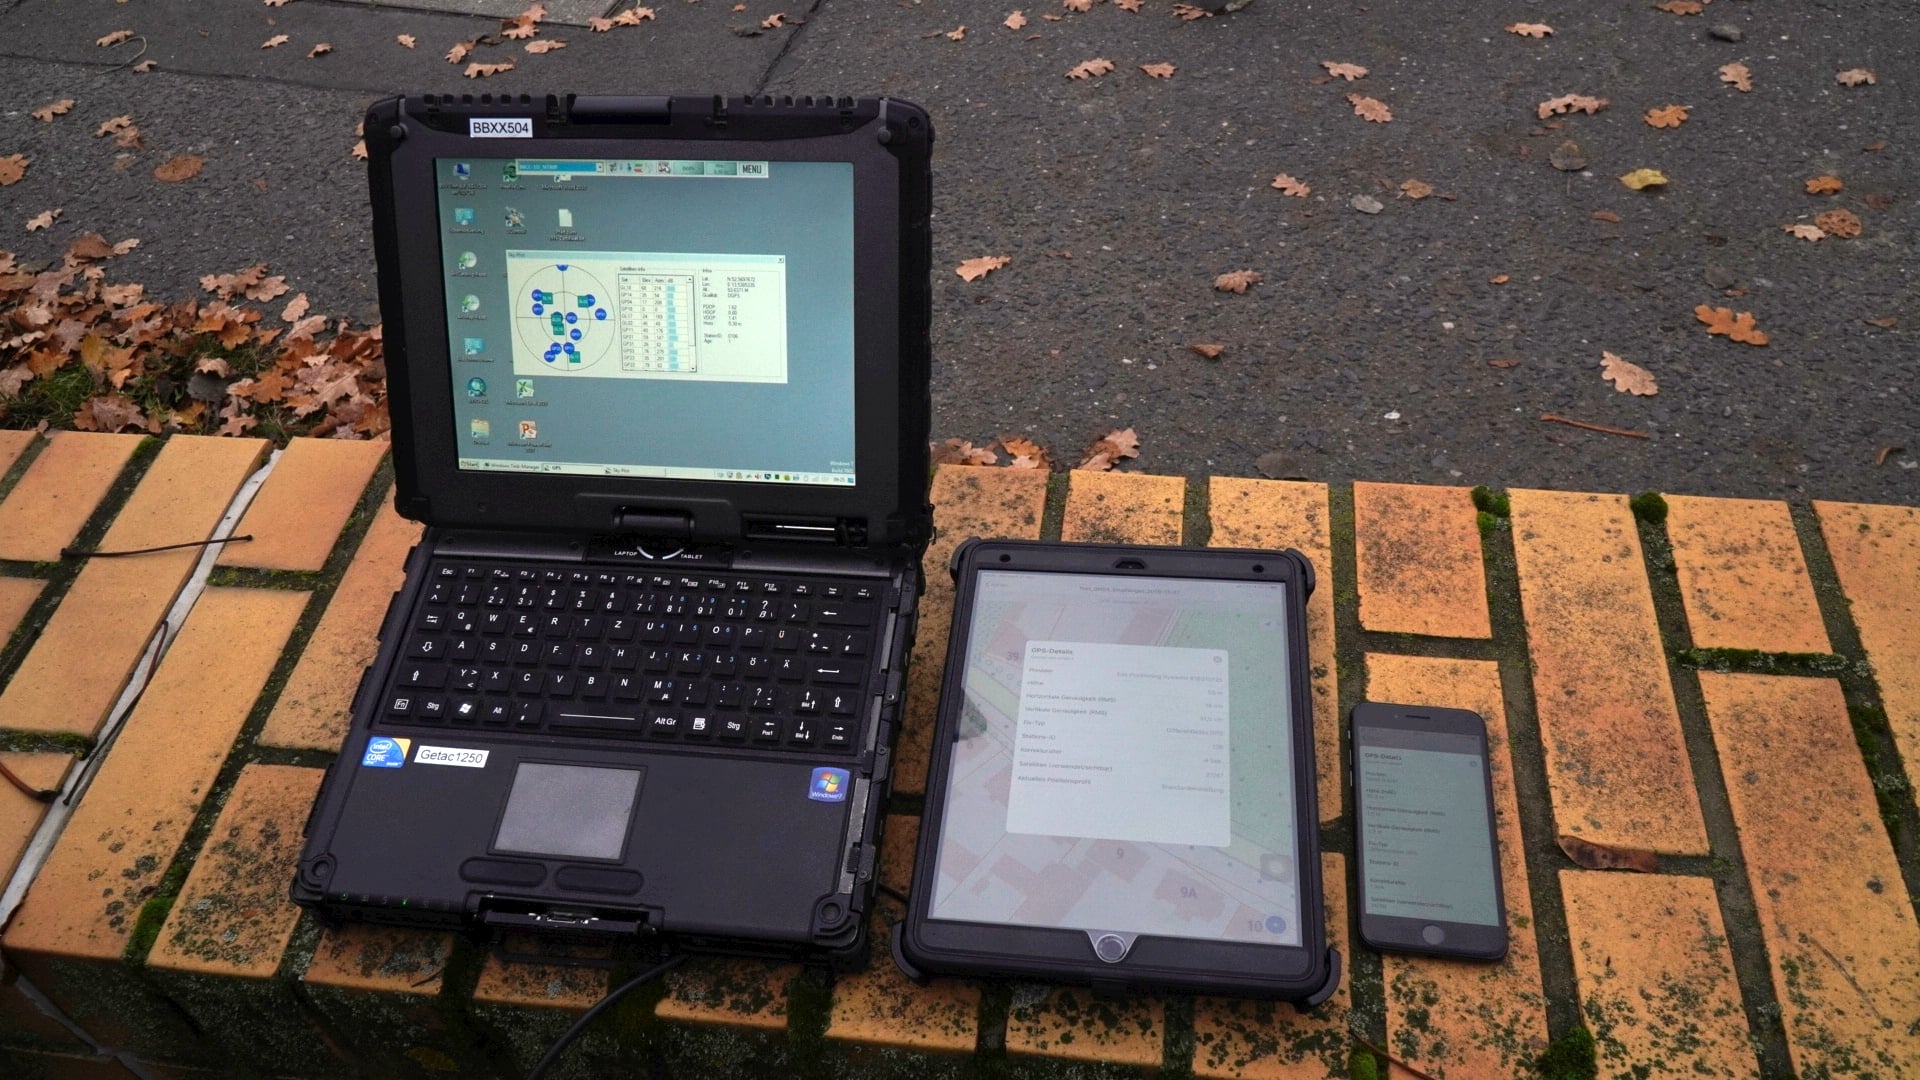 East Germany privatized land parcels with Arrow GNSS and Esri ArcGIS on iPads and iPhones